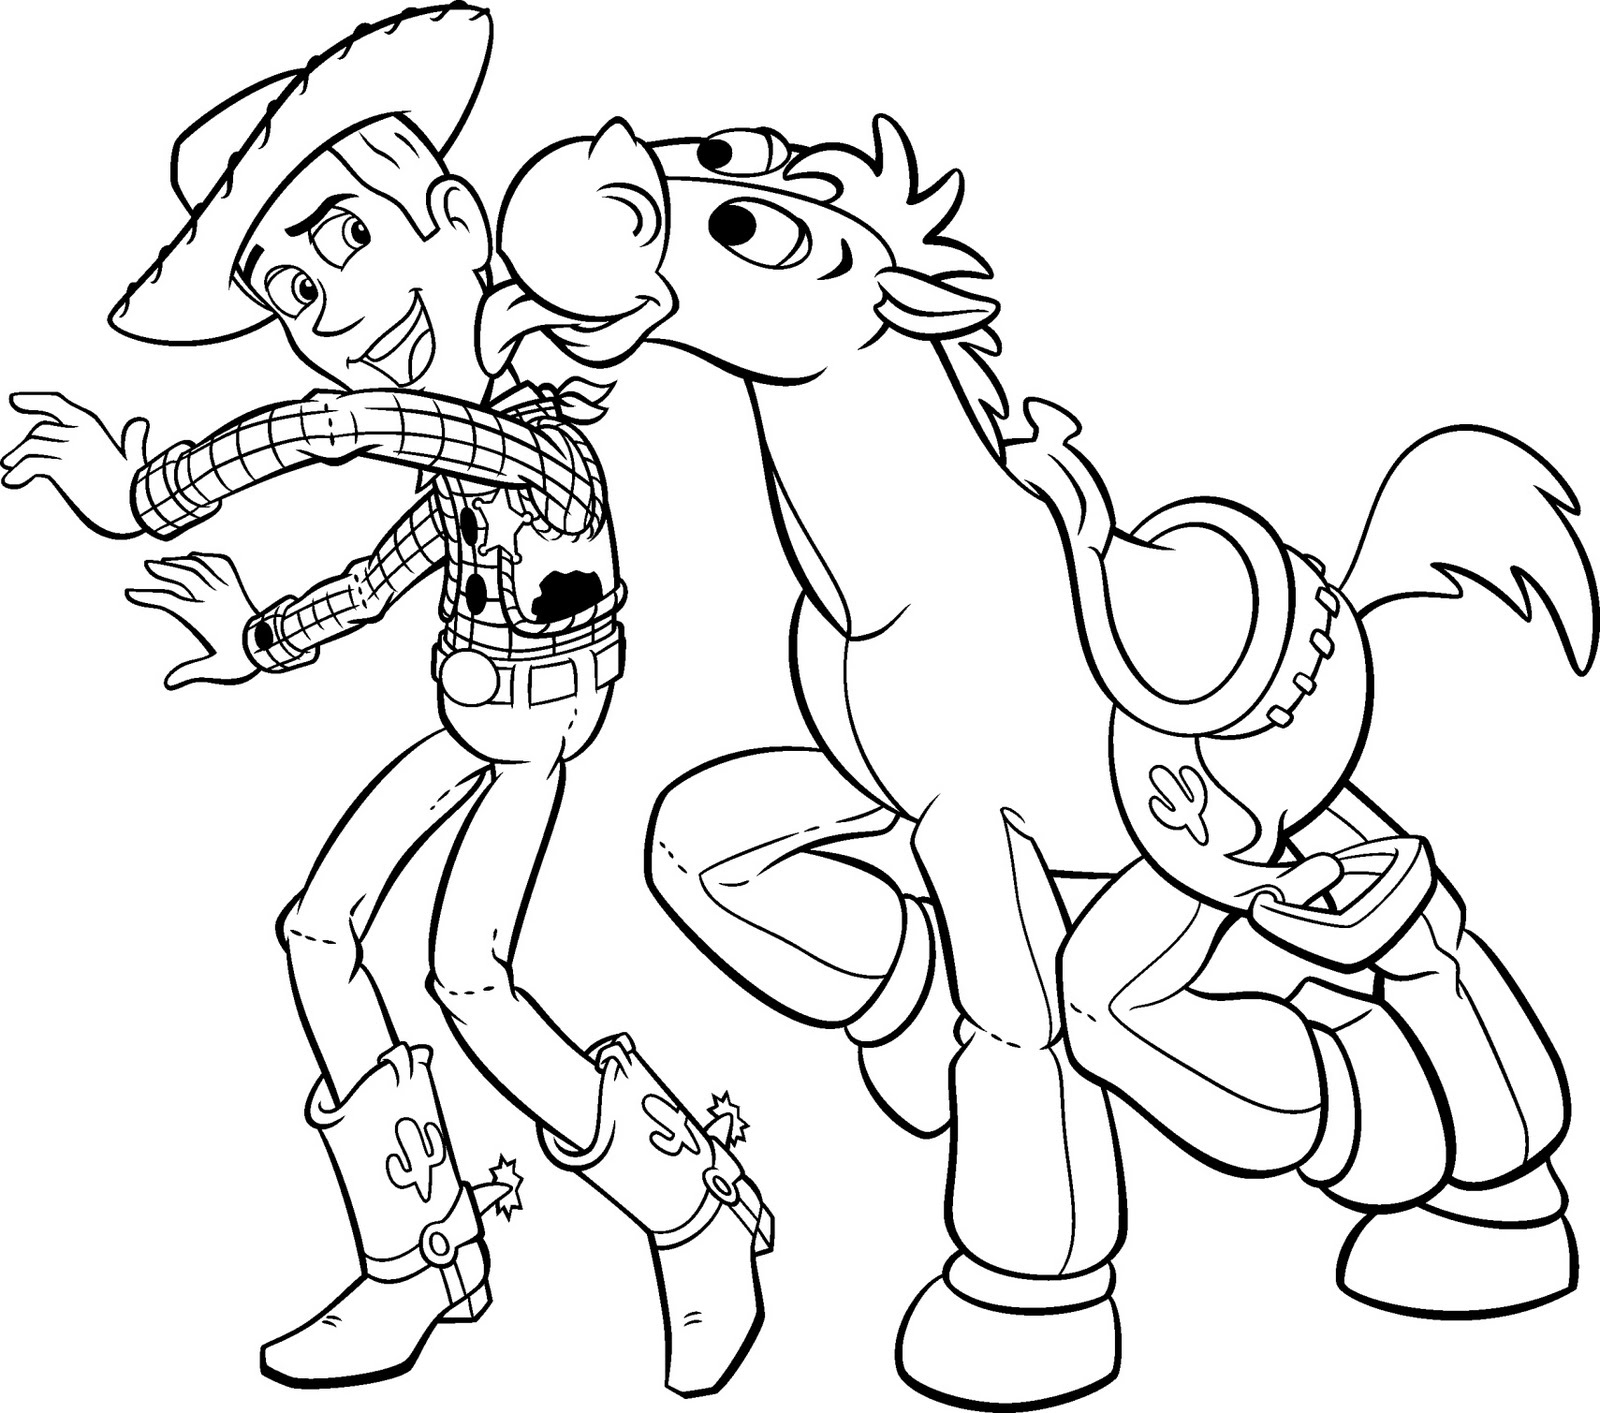 Woody Coloring Pages | Coloring Pages to Print